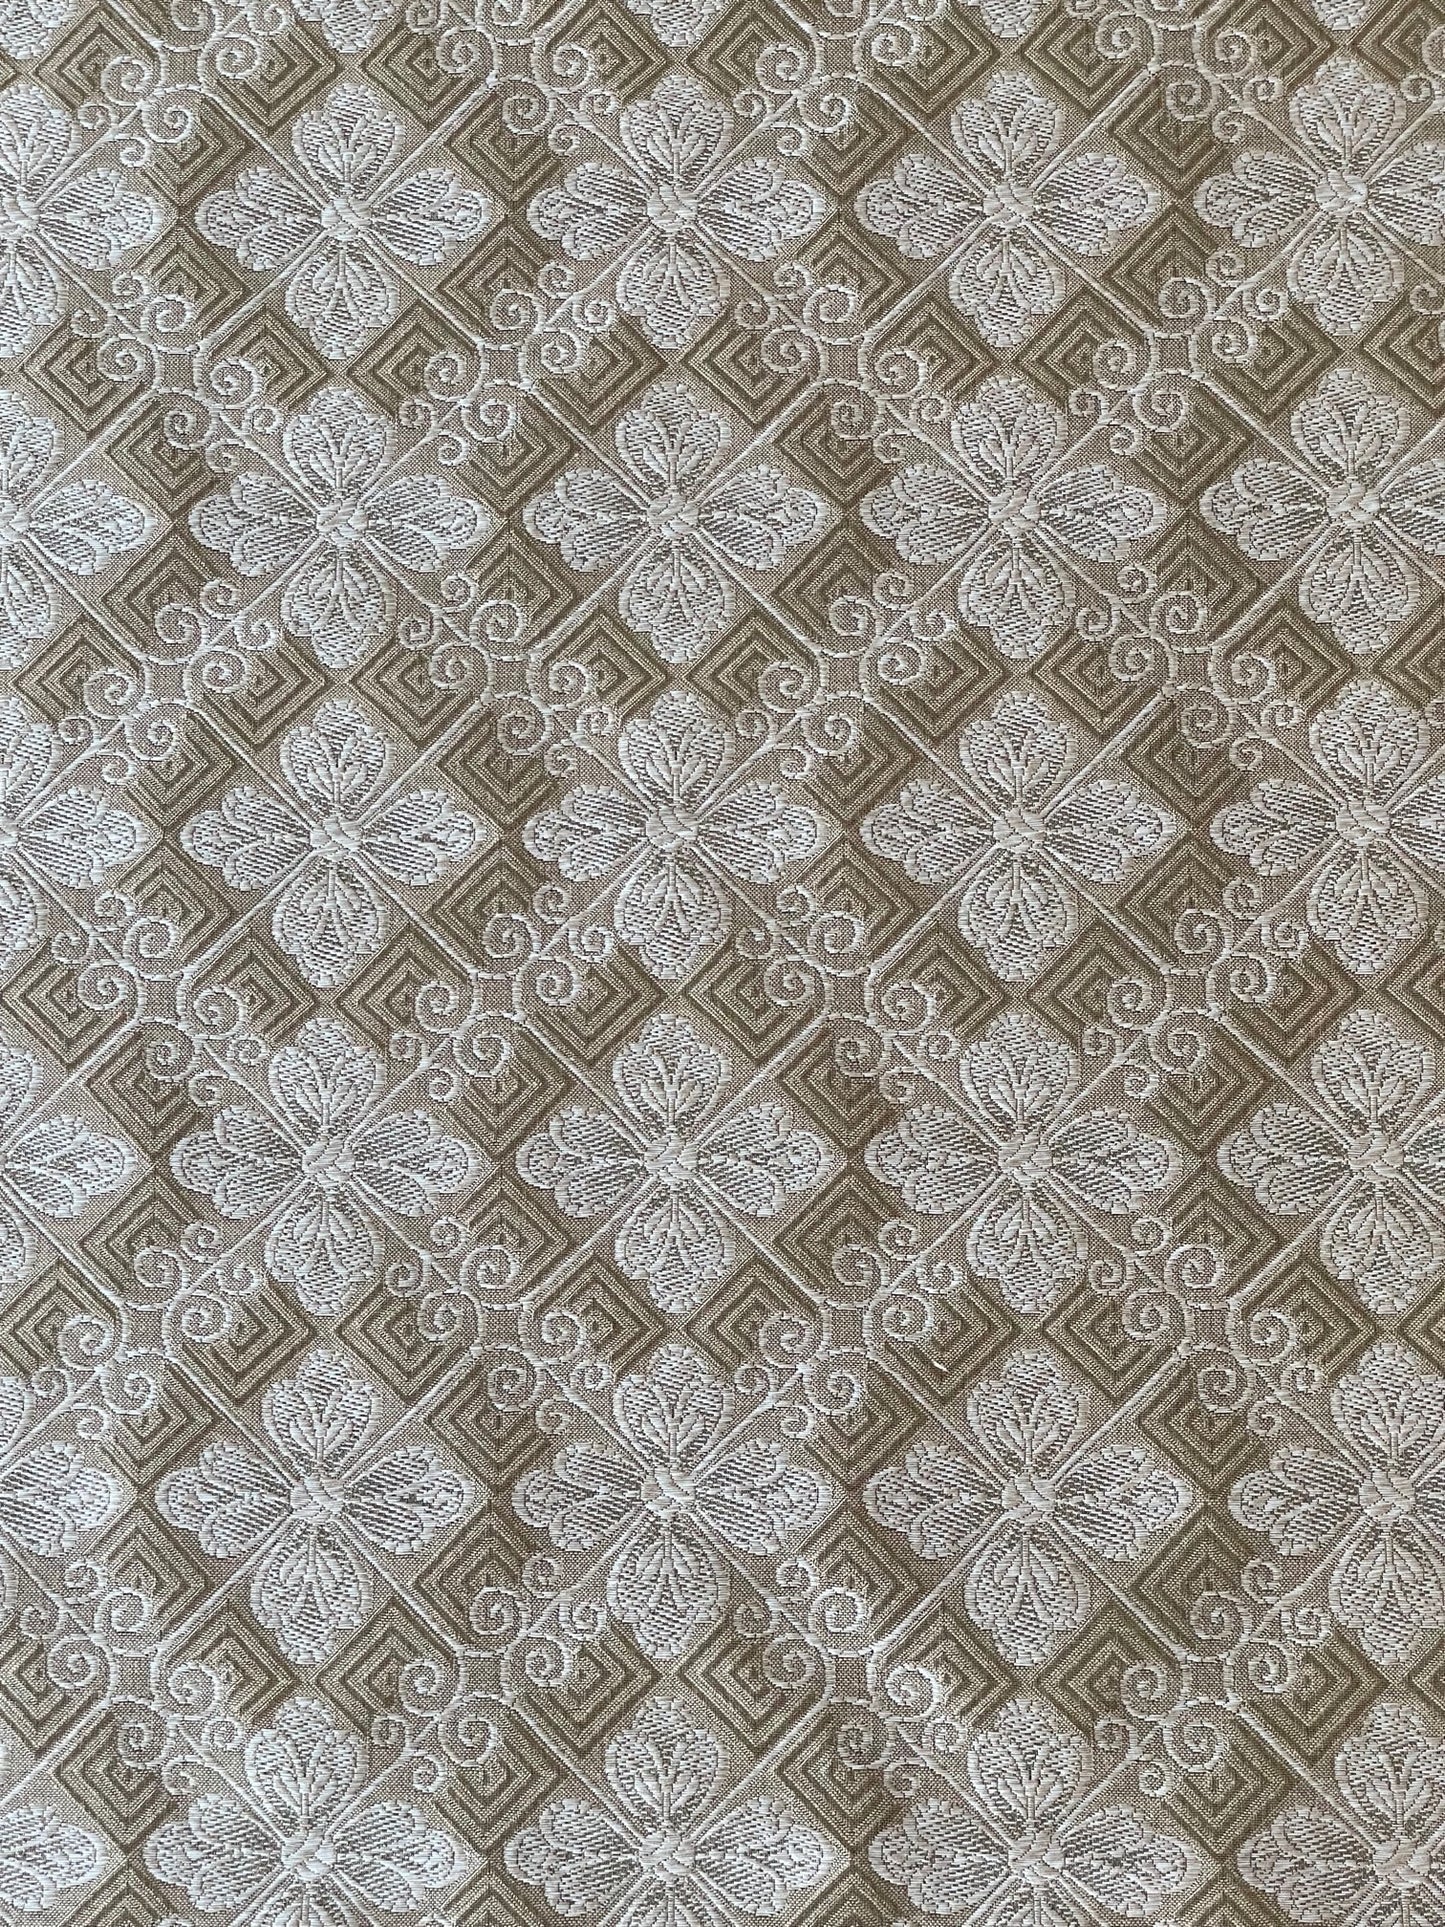 silver and taupe woven fabric with a tiled geometric design